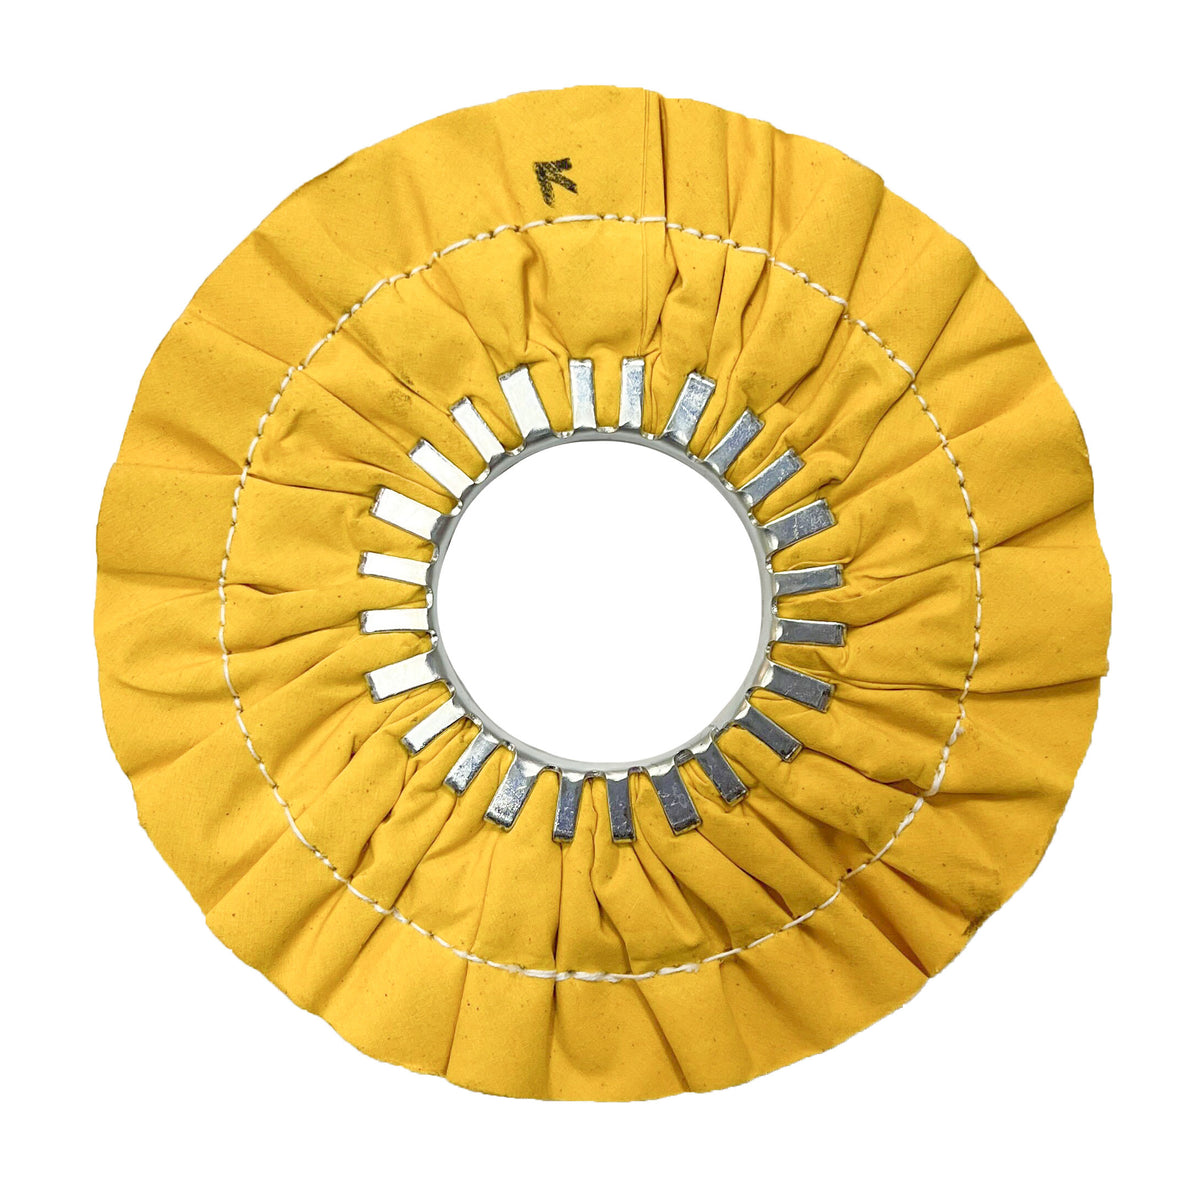 Renegade Products USA&#39;s yellow 9&quot; stitched airway buffing wheels, designed for high-performance buffing and polishing tasks